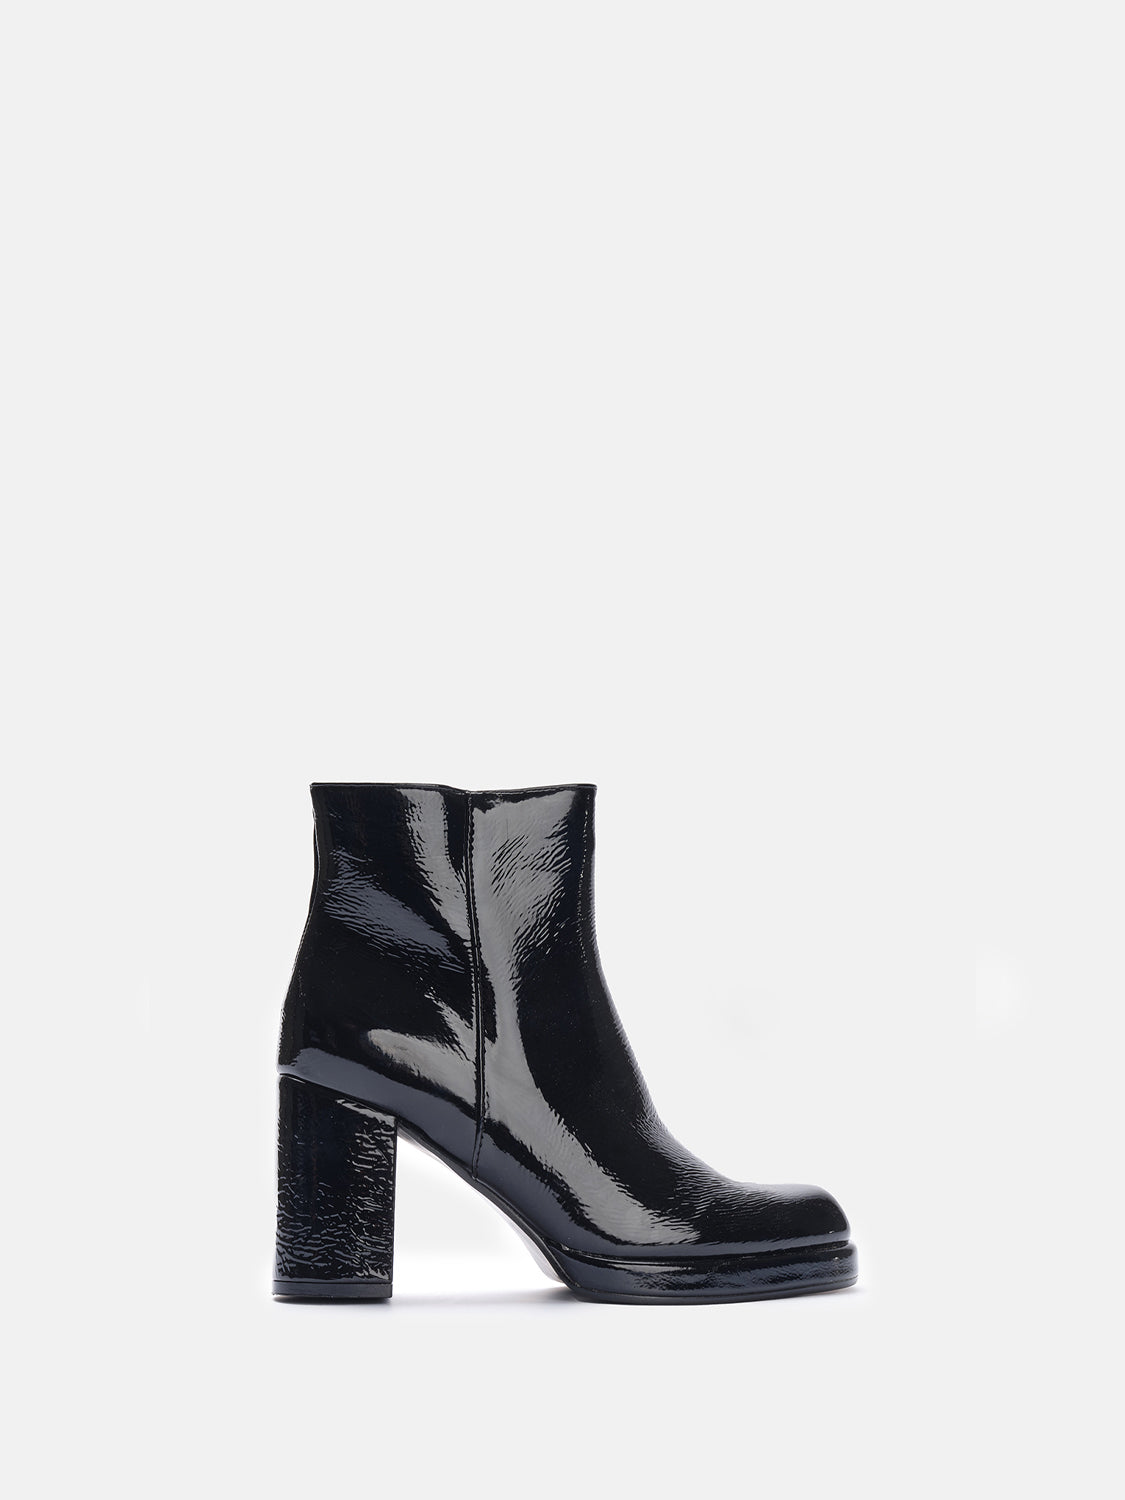 Patent leather ankle boot heel 8 - BLACK